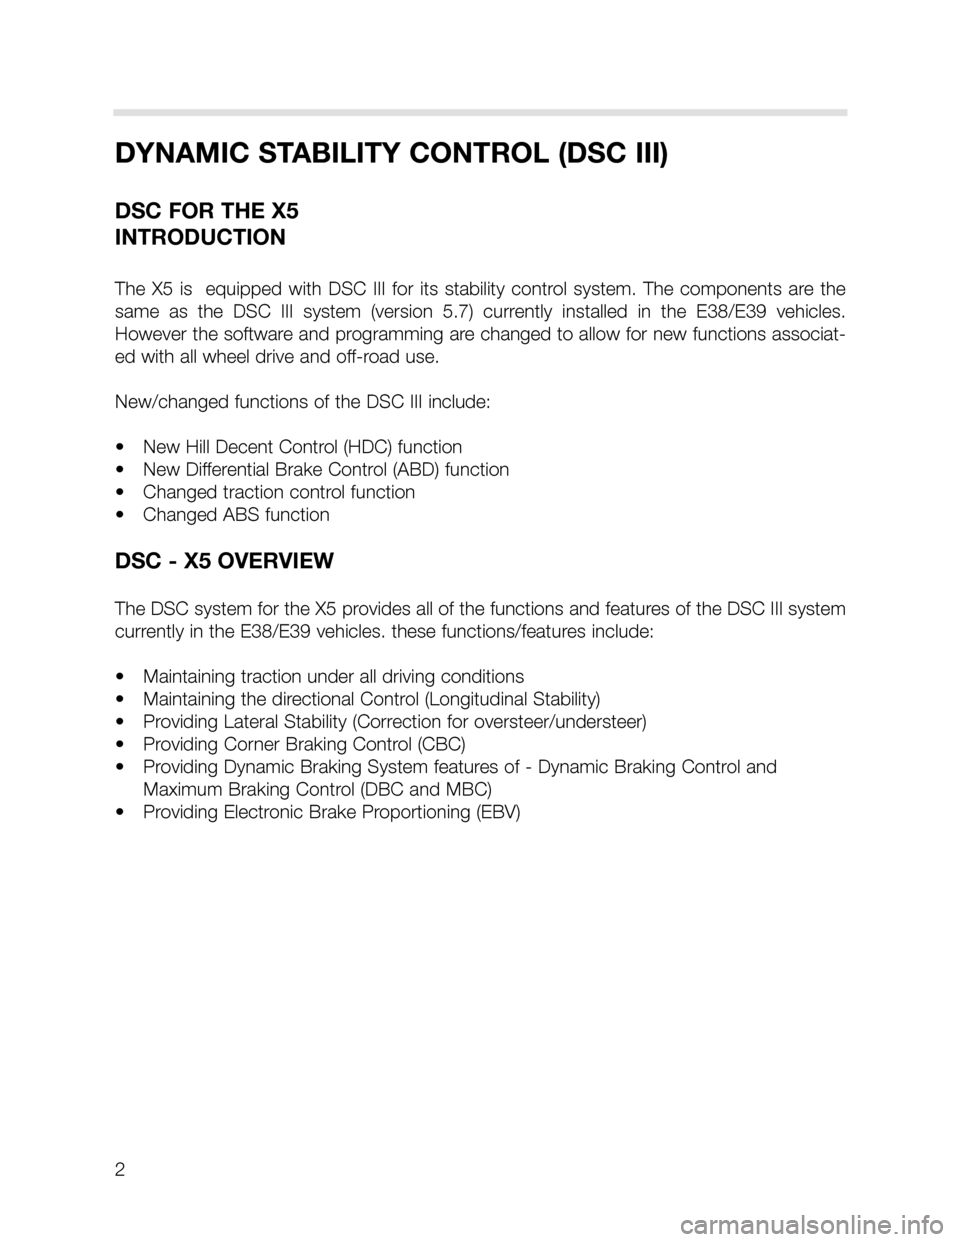 BMW X5 2000 E53 DSC System Workshop Manual 2
DYNAMIC STABILITY CONTROL (DSC III)
DSC FOR THE X5
INTRODUCTION
The  X5  is    equipped  with  DSC  III  for  its  stability  control  system.  The  components  are  the
same  as  the  DSC  III  sys